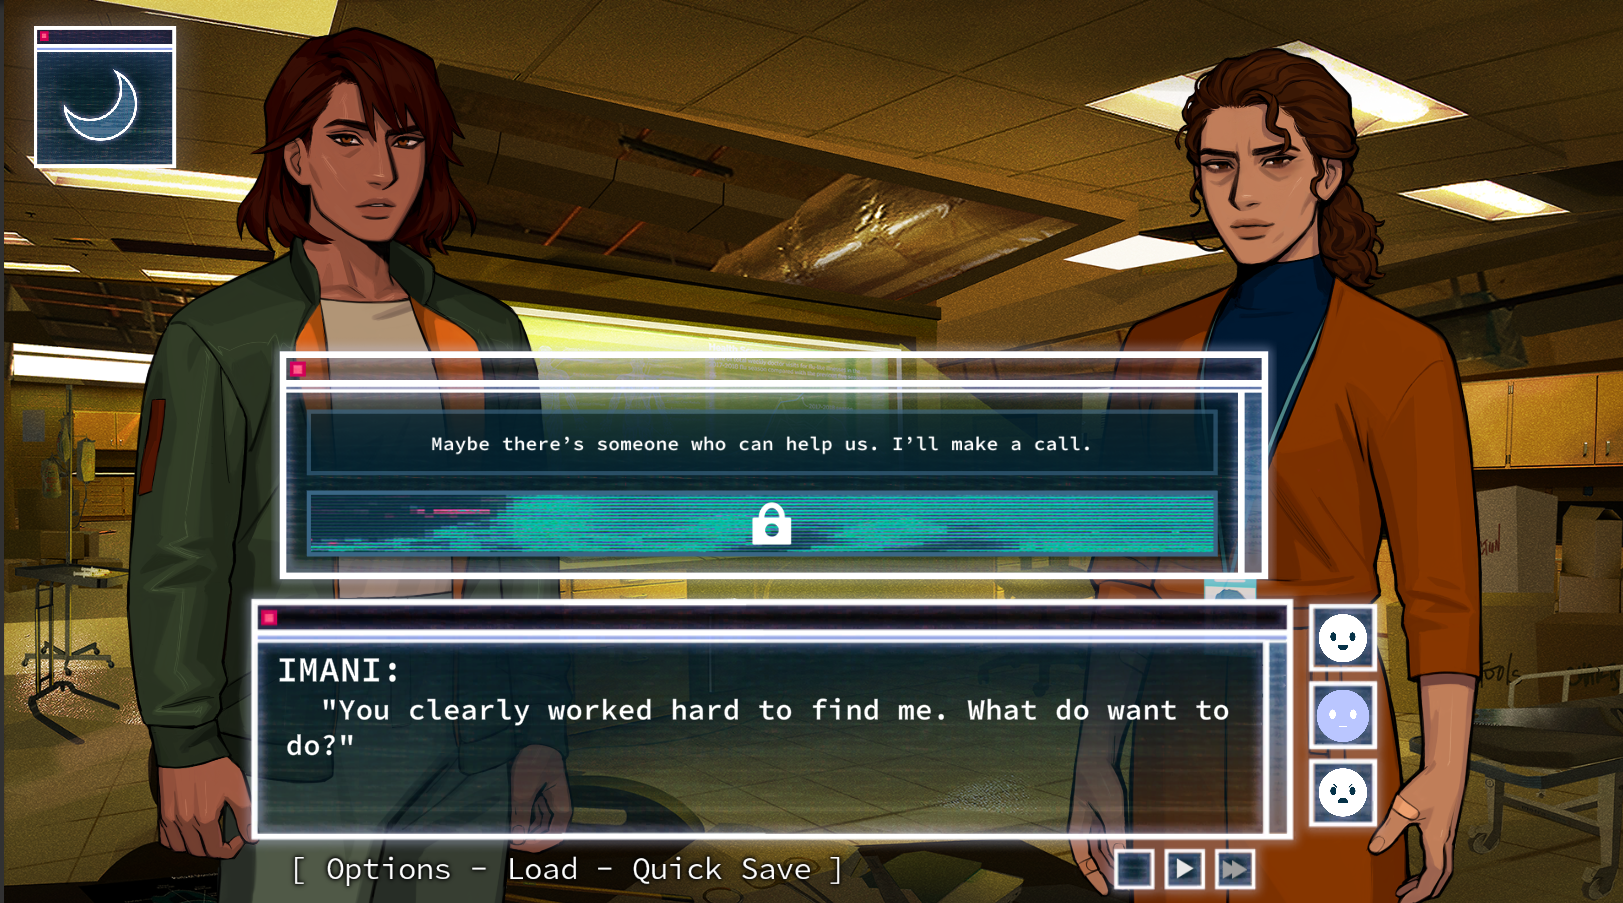 Screenshot from Love Shore of two characters talking. Imani is saying "You clearly worked hard to find me. What do you want to do?"